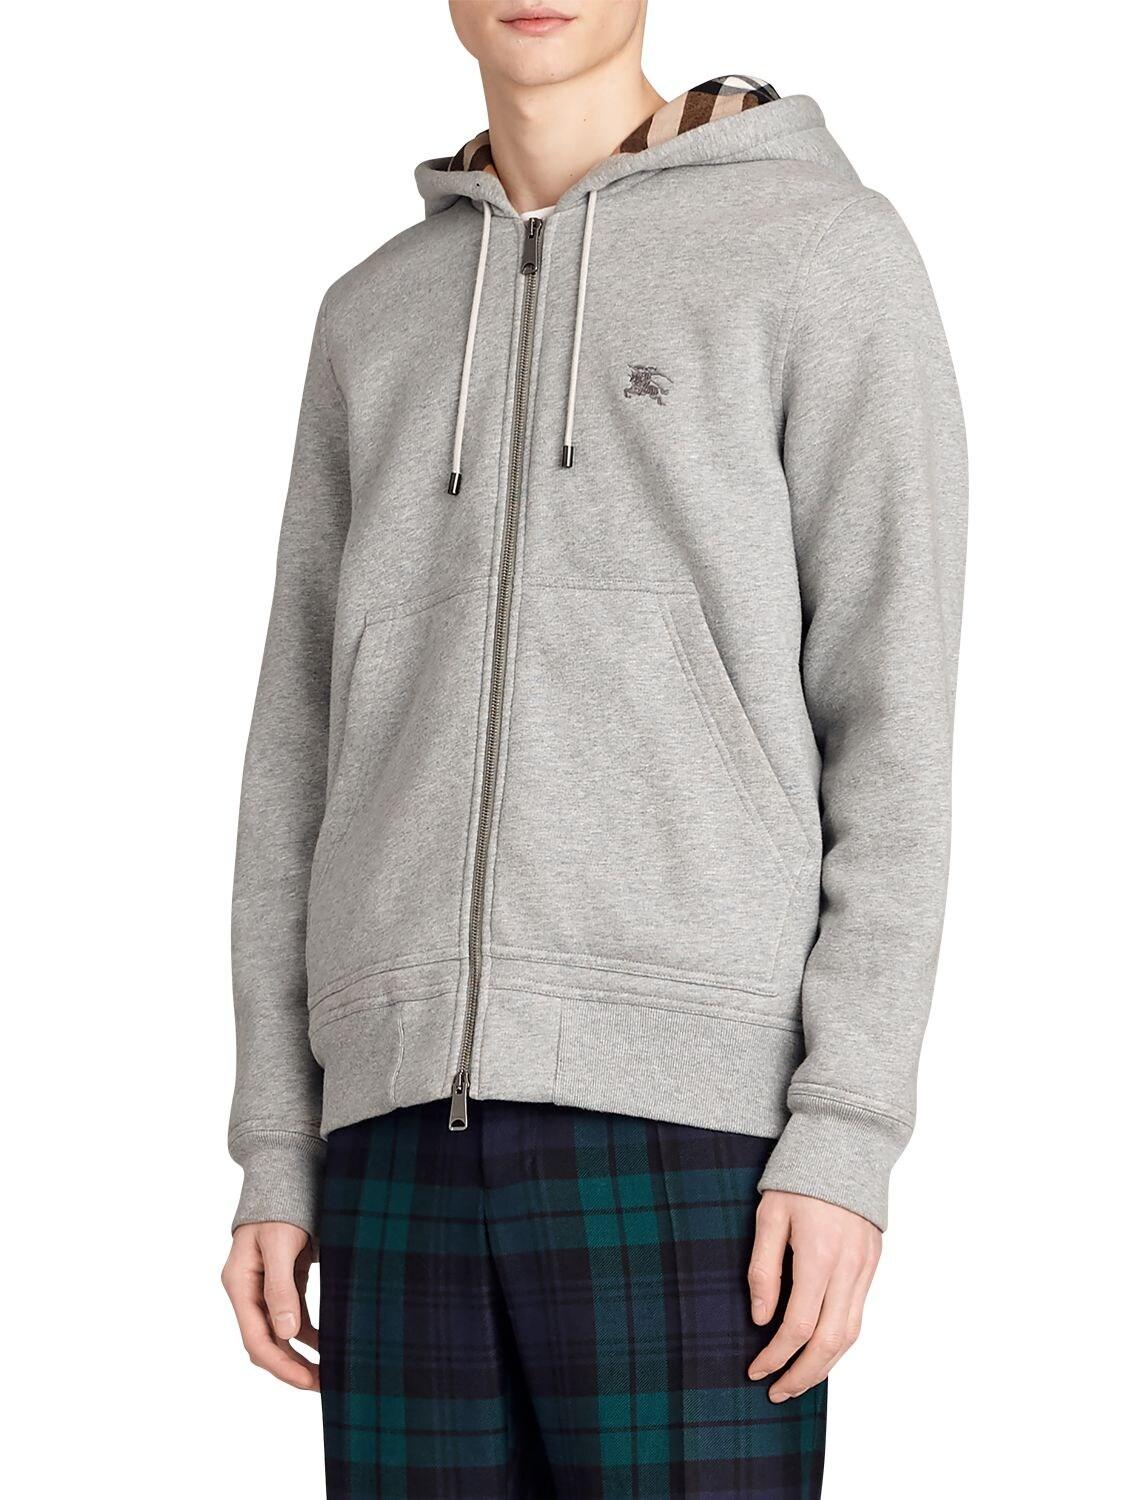 Burberry Stanford Double Check nylon jacket - ShopStyle